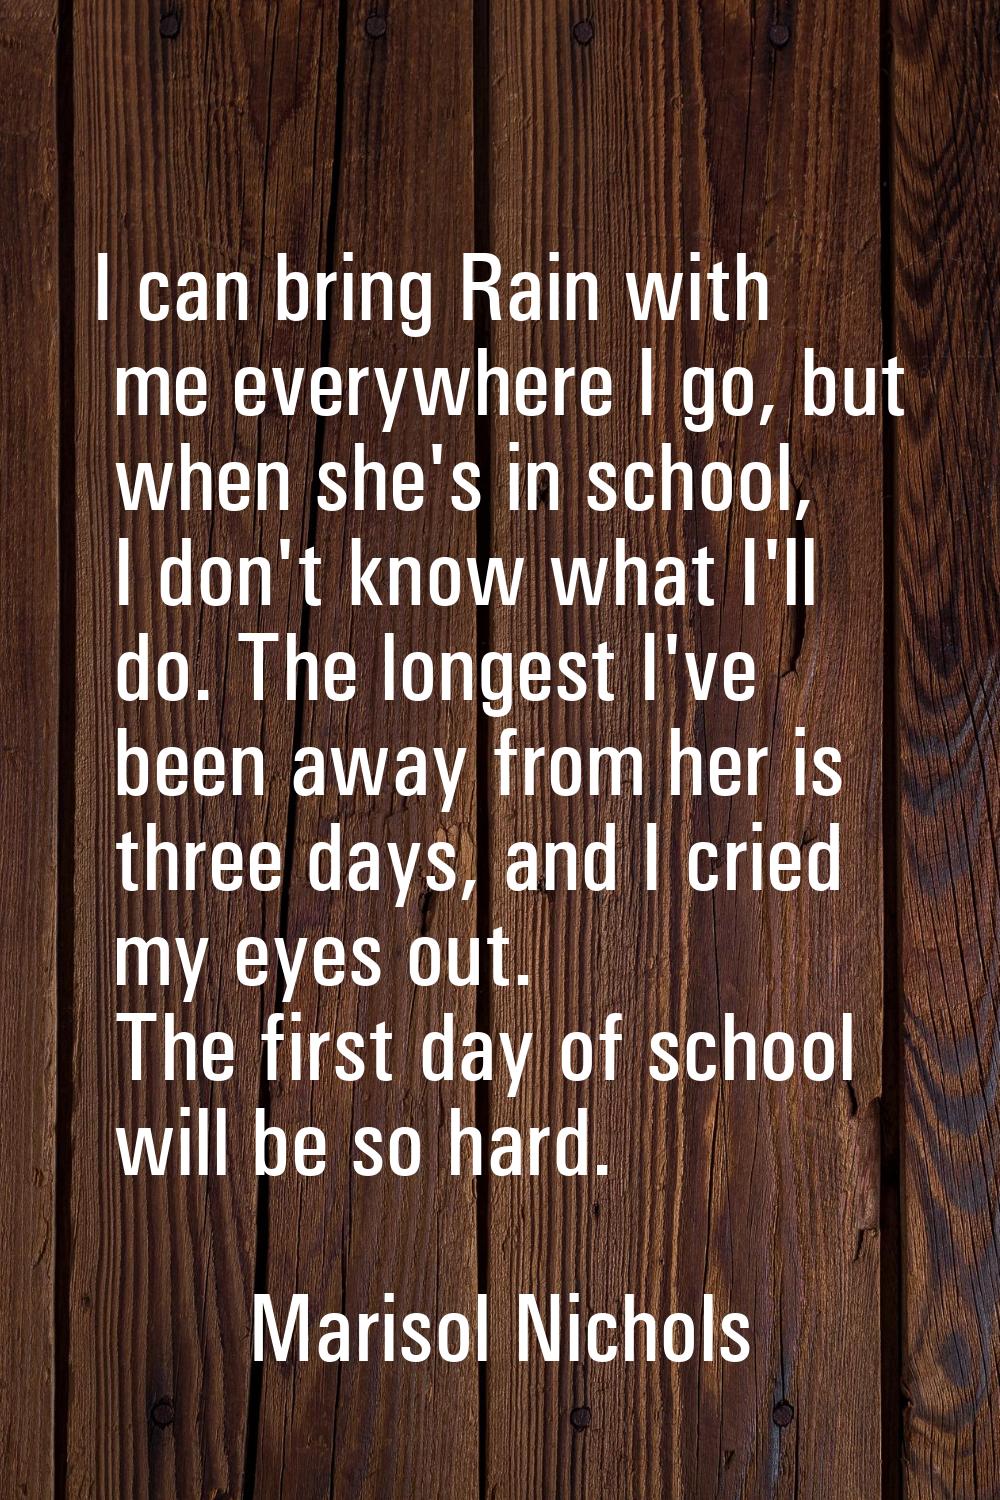 I can bring Rain with me everywhere I go, but when she's in school, I don't know what I'll do. The 